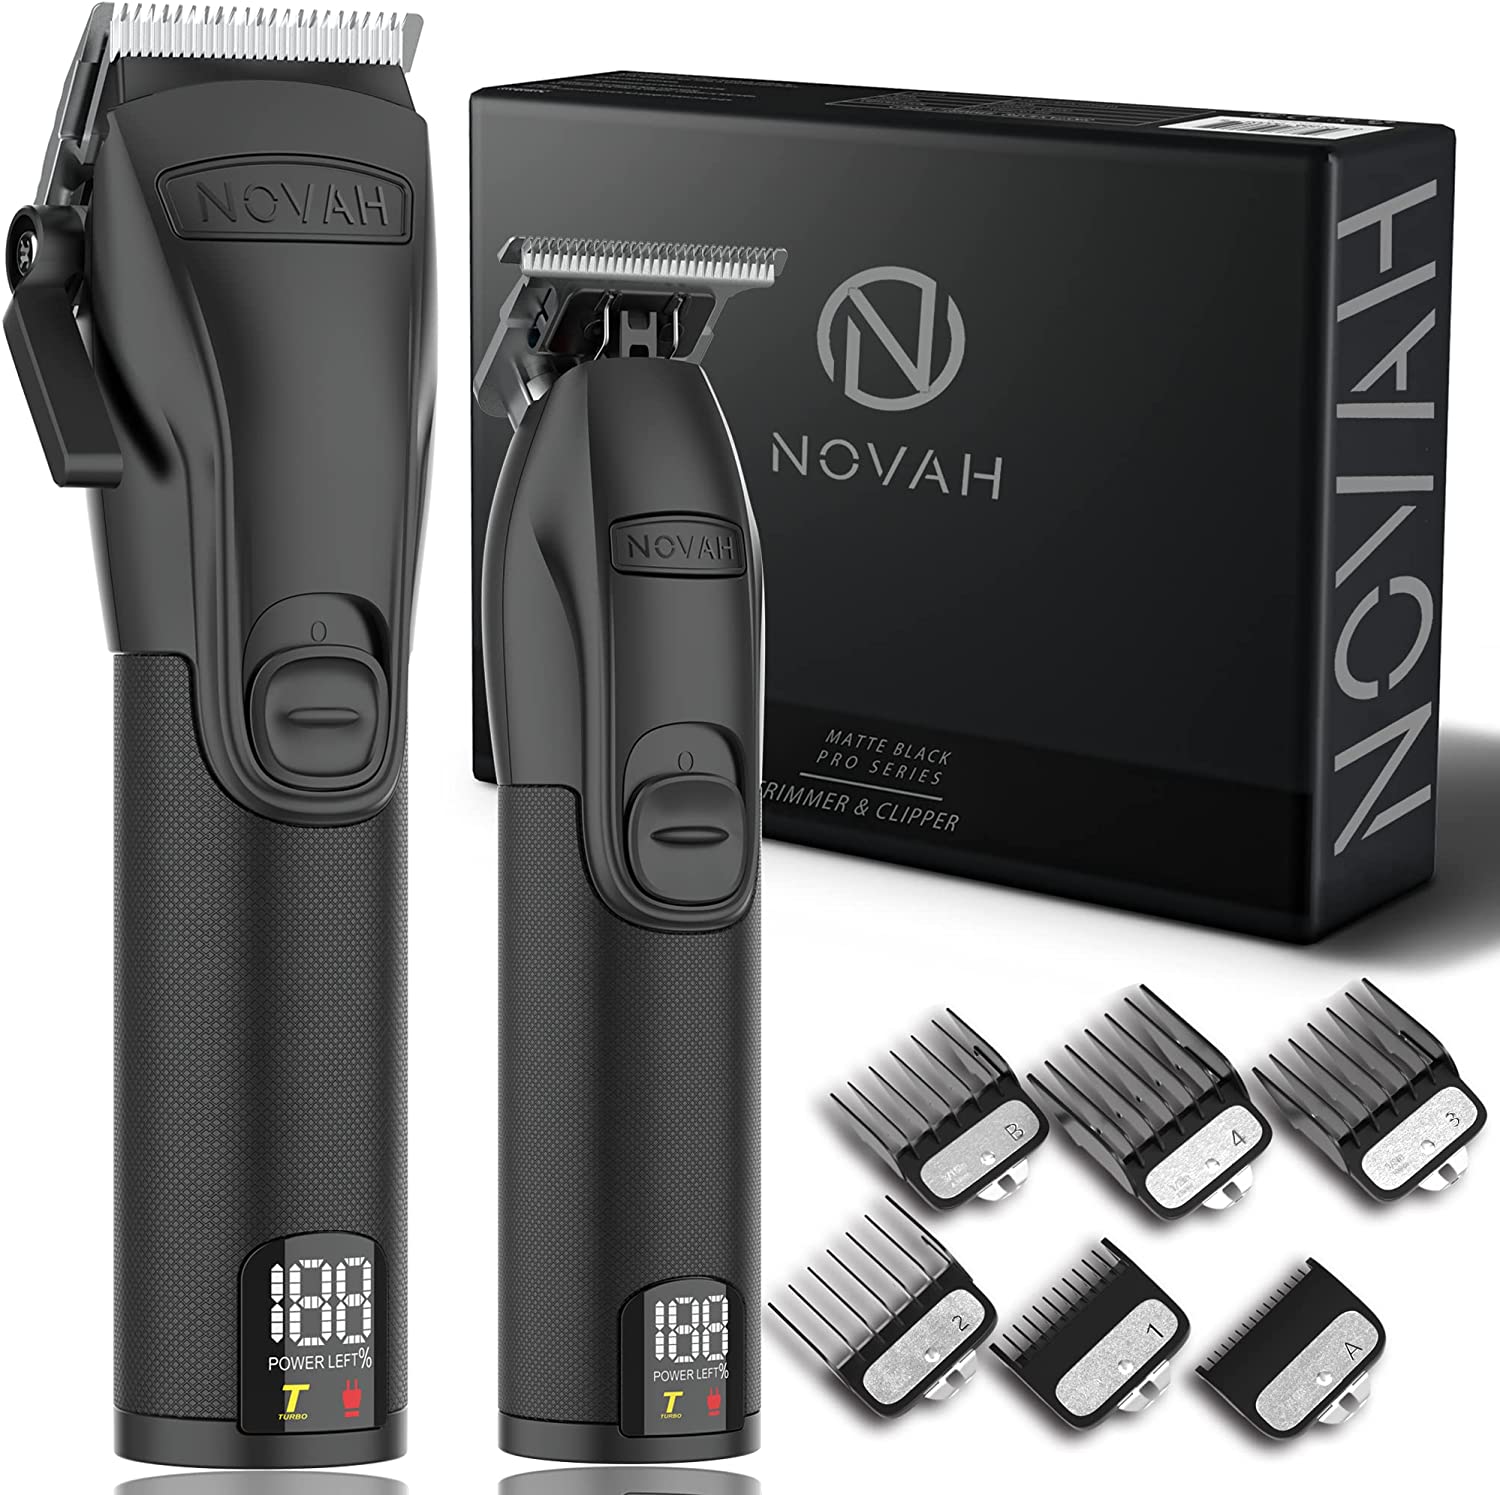 NOVAH Professional Hair Clippers and Trimmer Kit for Men Best Professional Hair Clippers